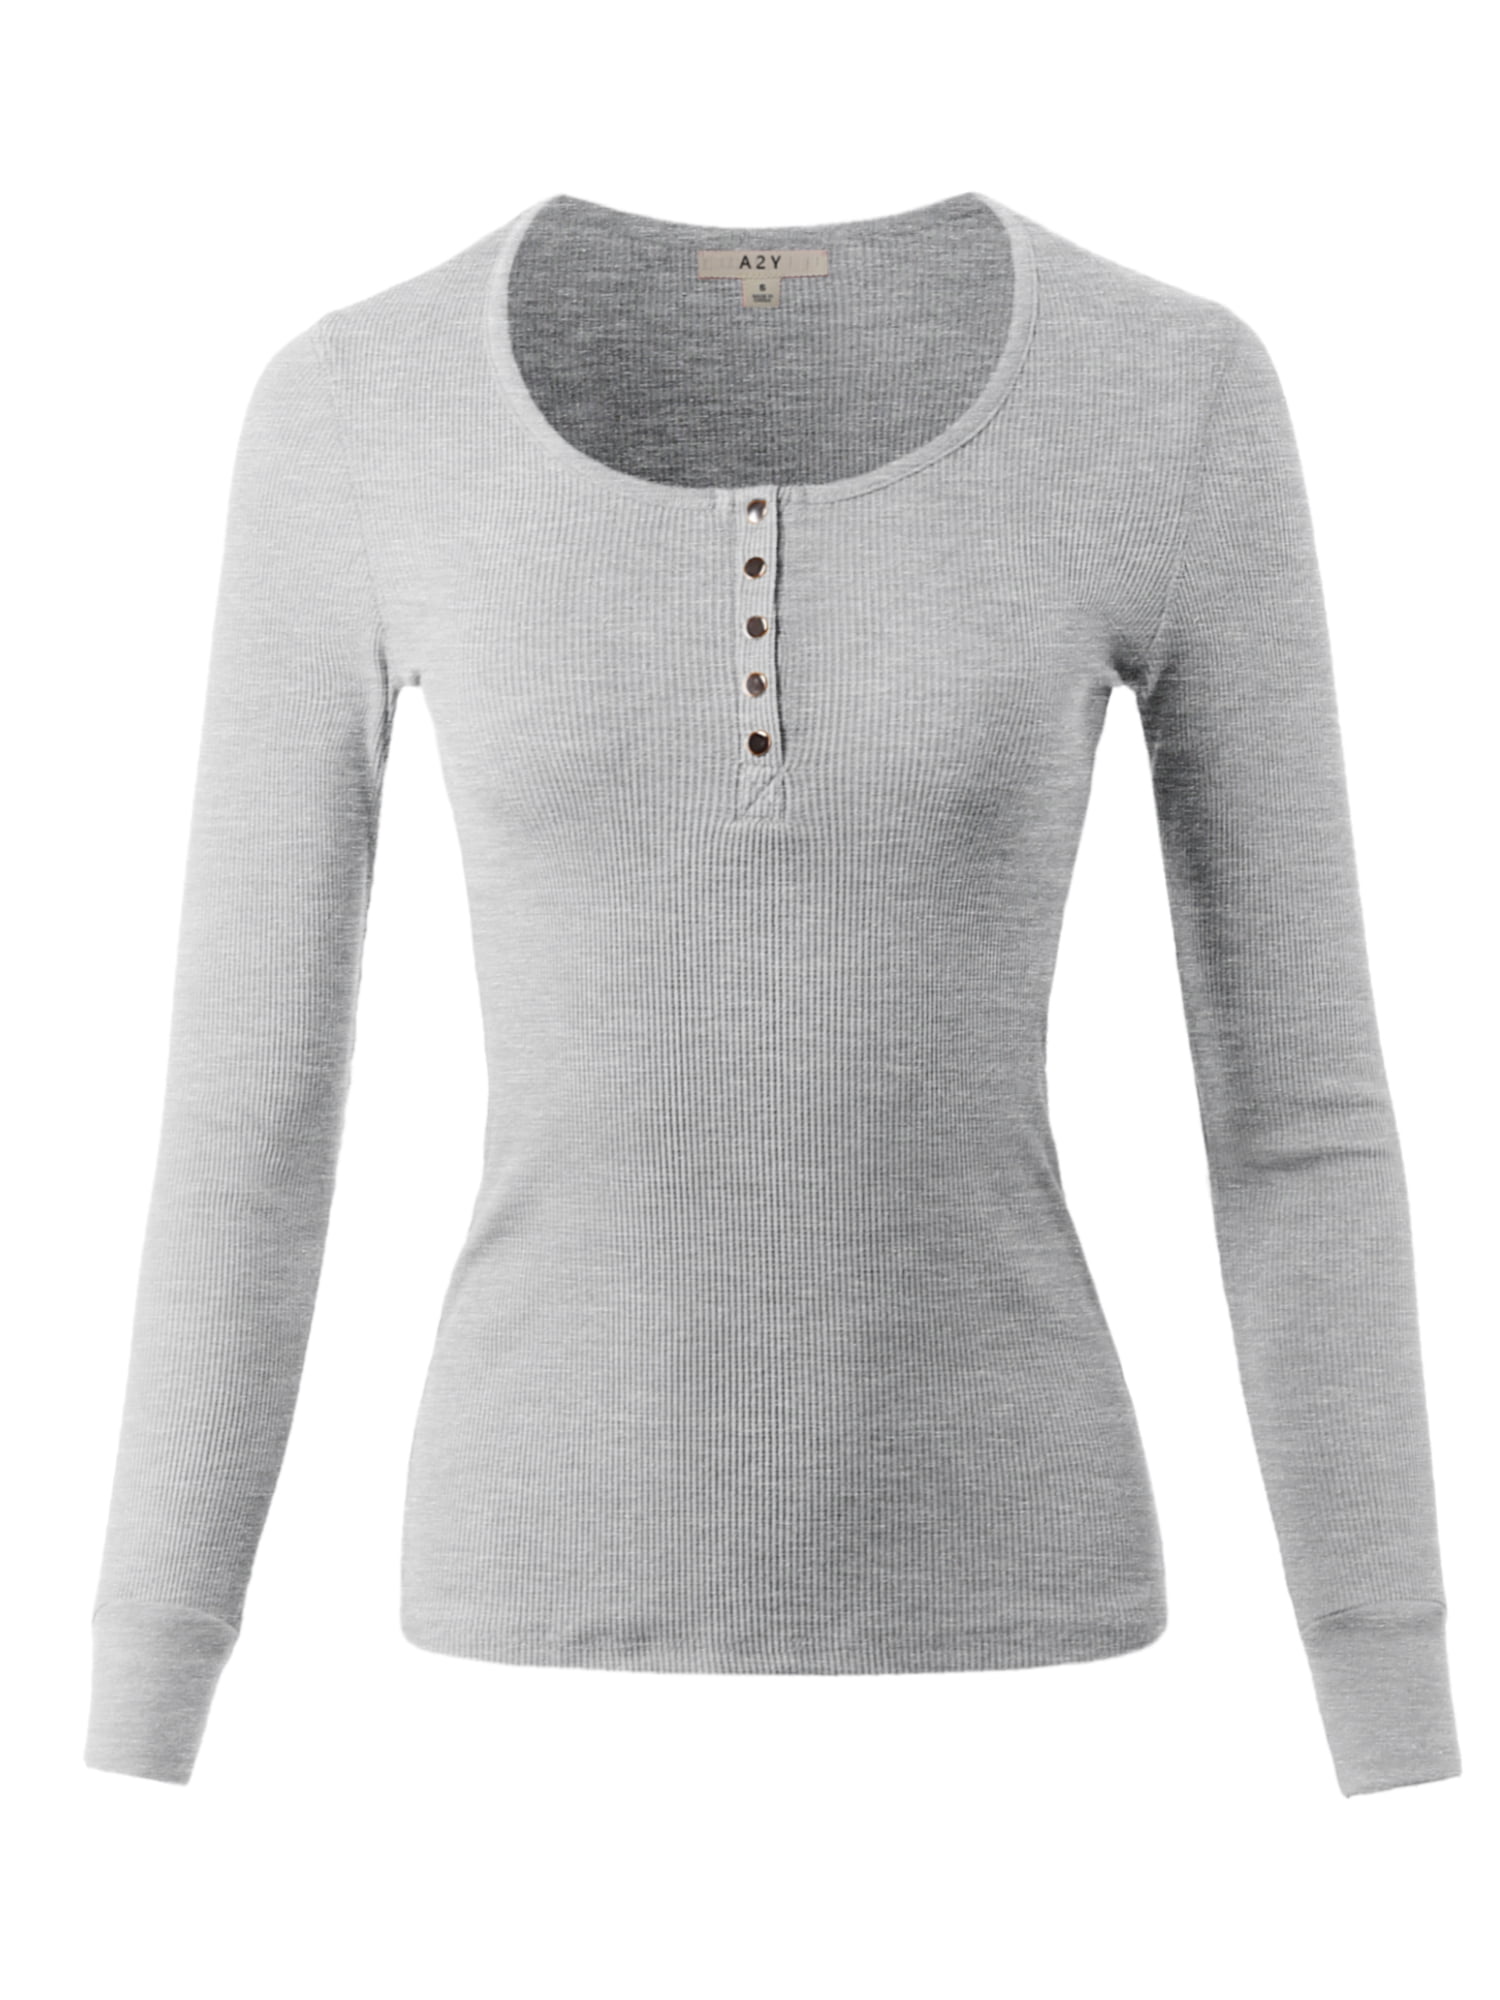 A2Y Women's Fitted Snap Button Henley Crew Neck Long Sleeve Thermal ...